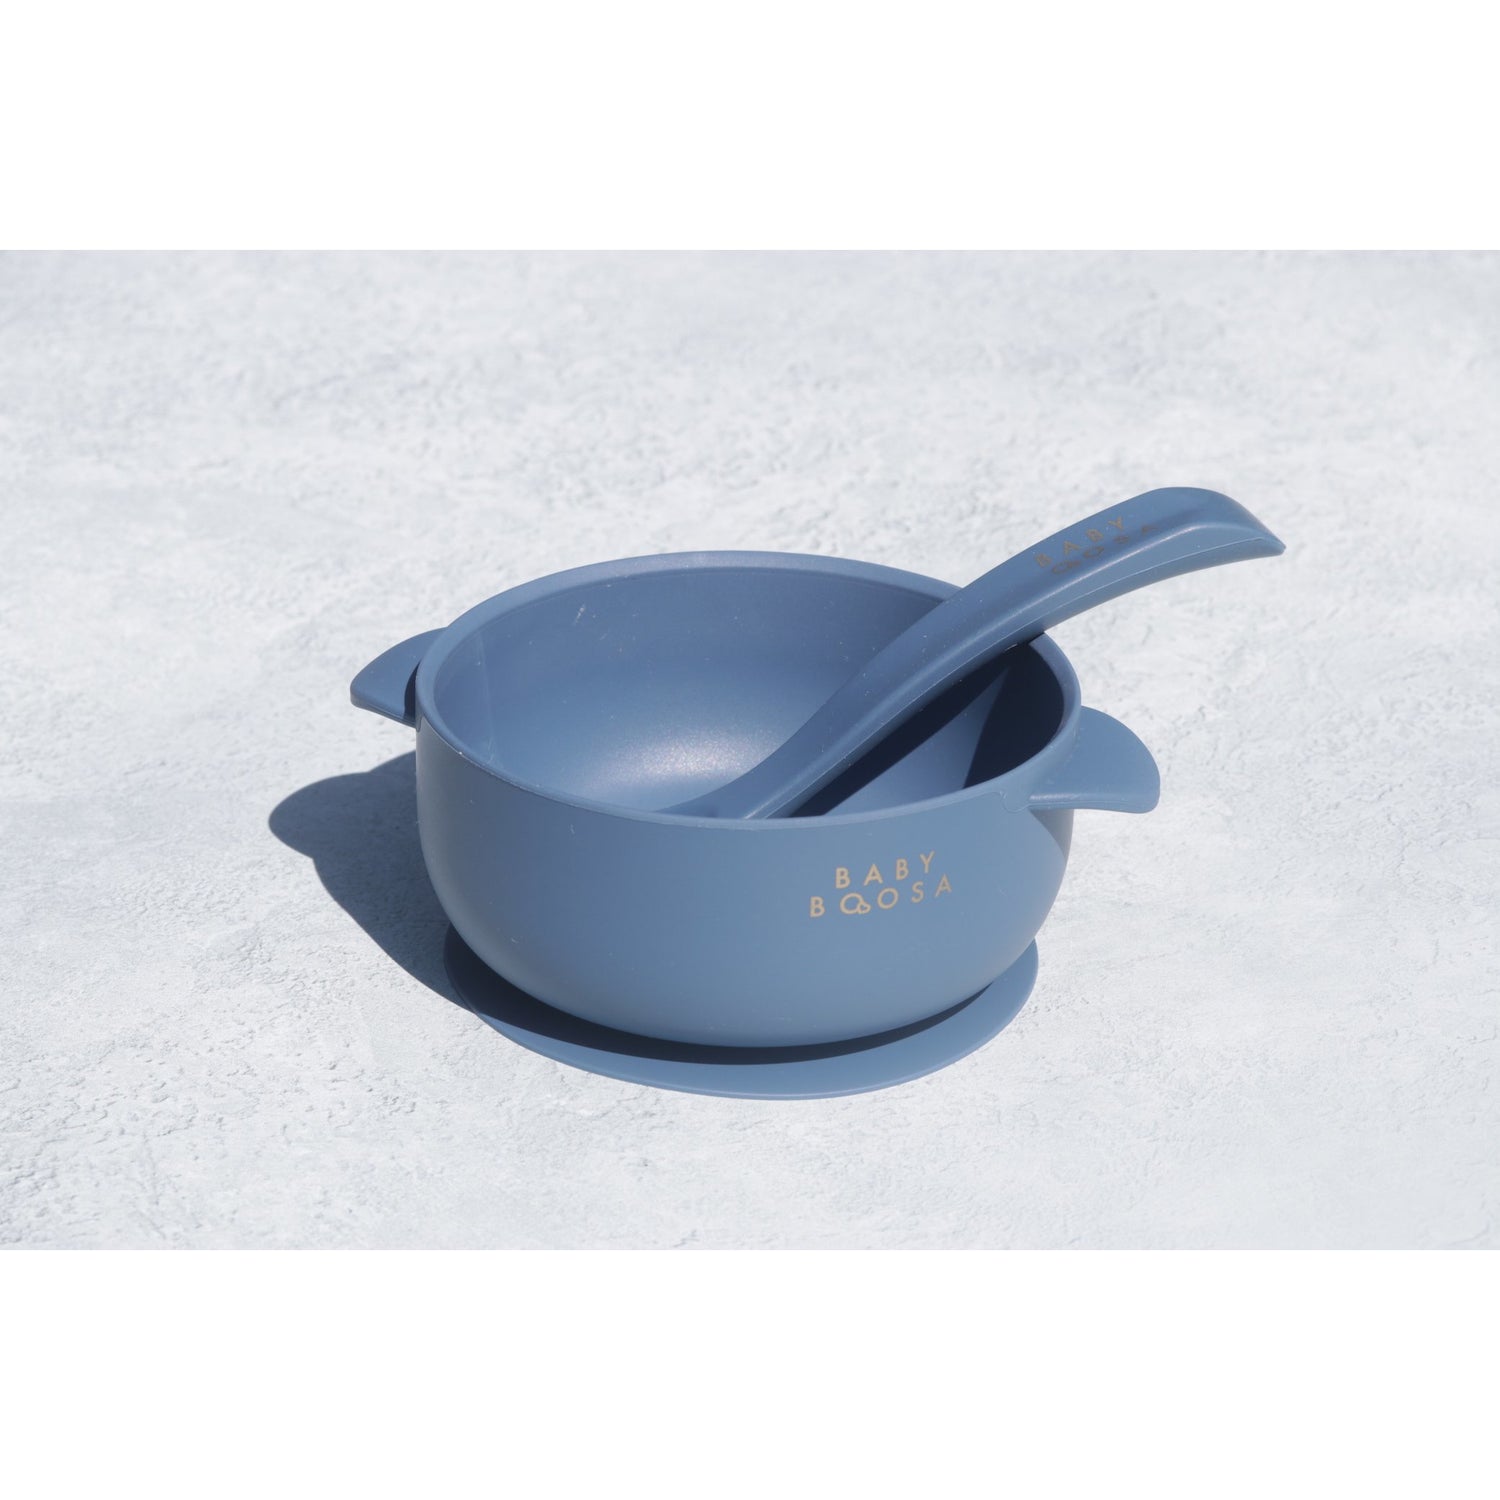 Bowl + Lid + Spoon Set | Grippy Suction | No-Spill | Easy Clean | Teething Soft Spoon (Riviera Blue)